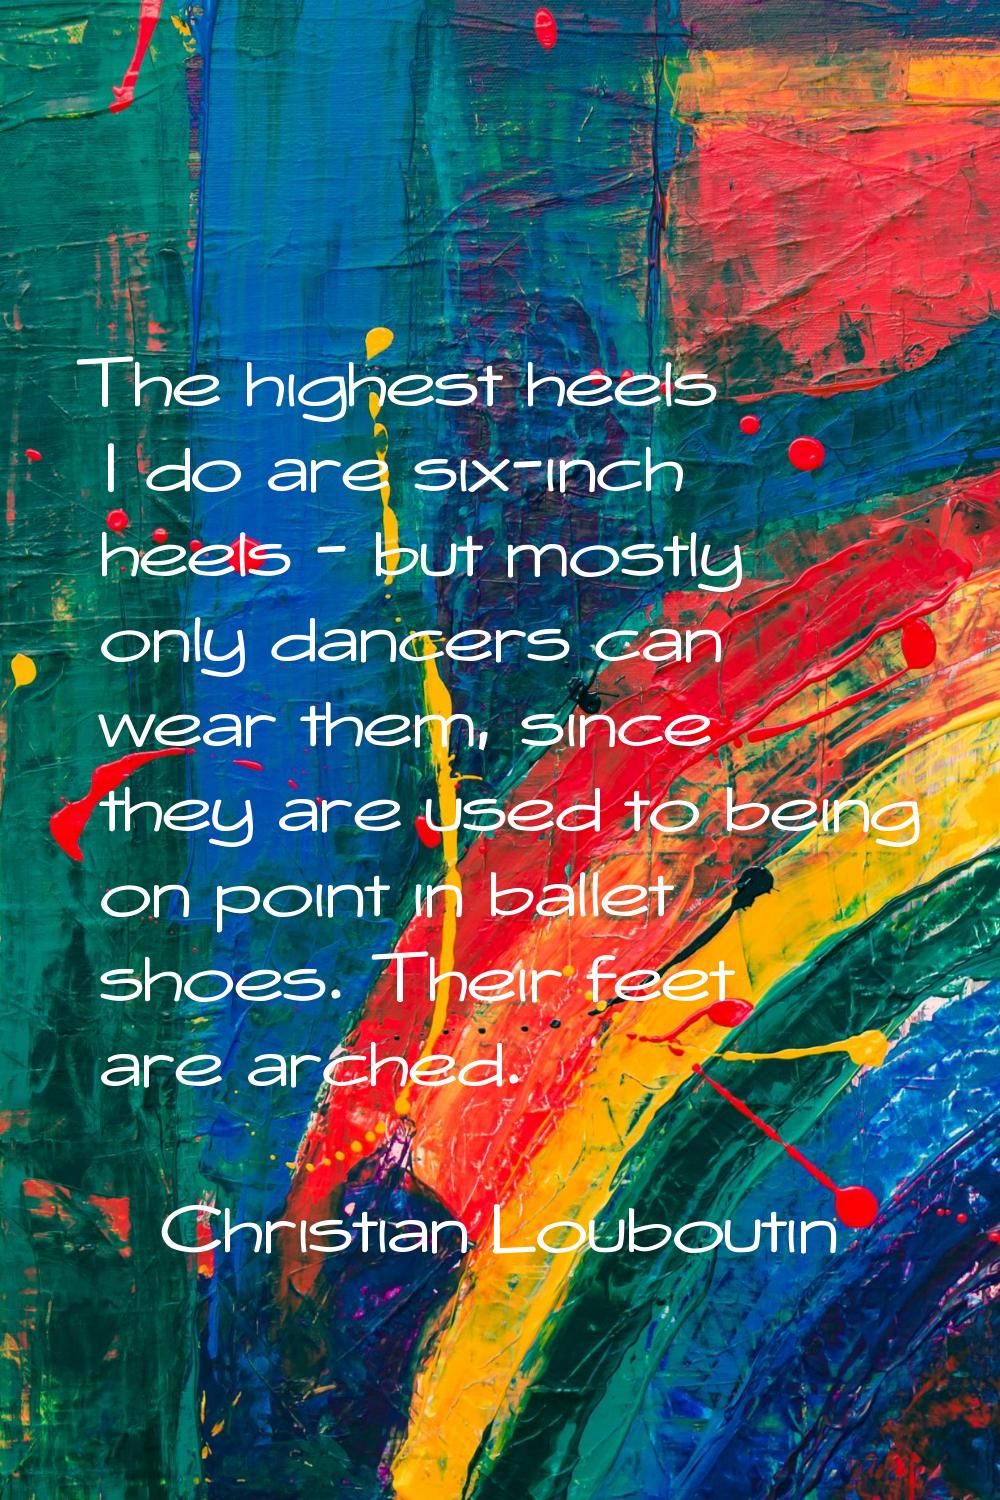 The highest heels I do are six-inch heels - but mostly only dancers can wear them, since they are u